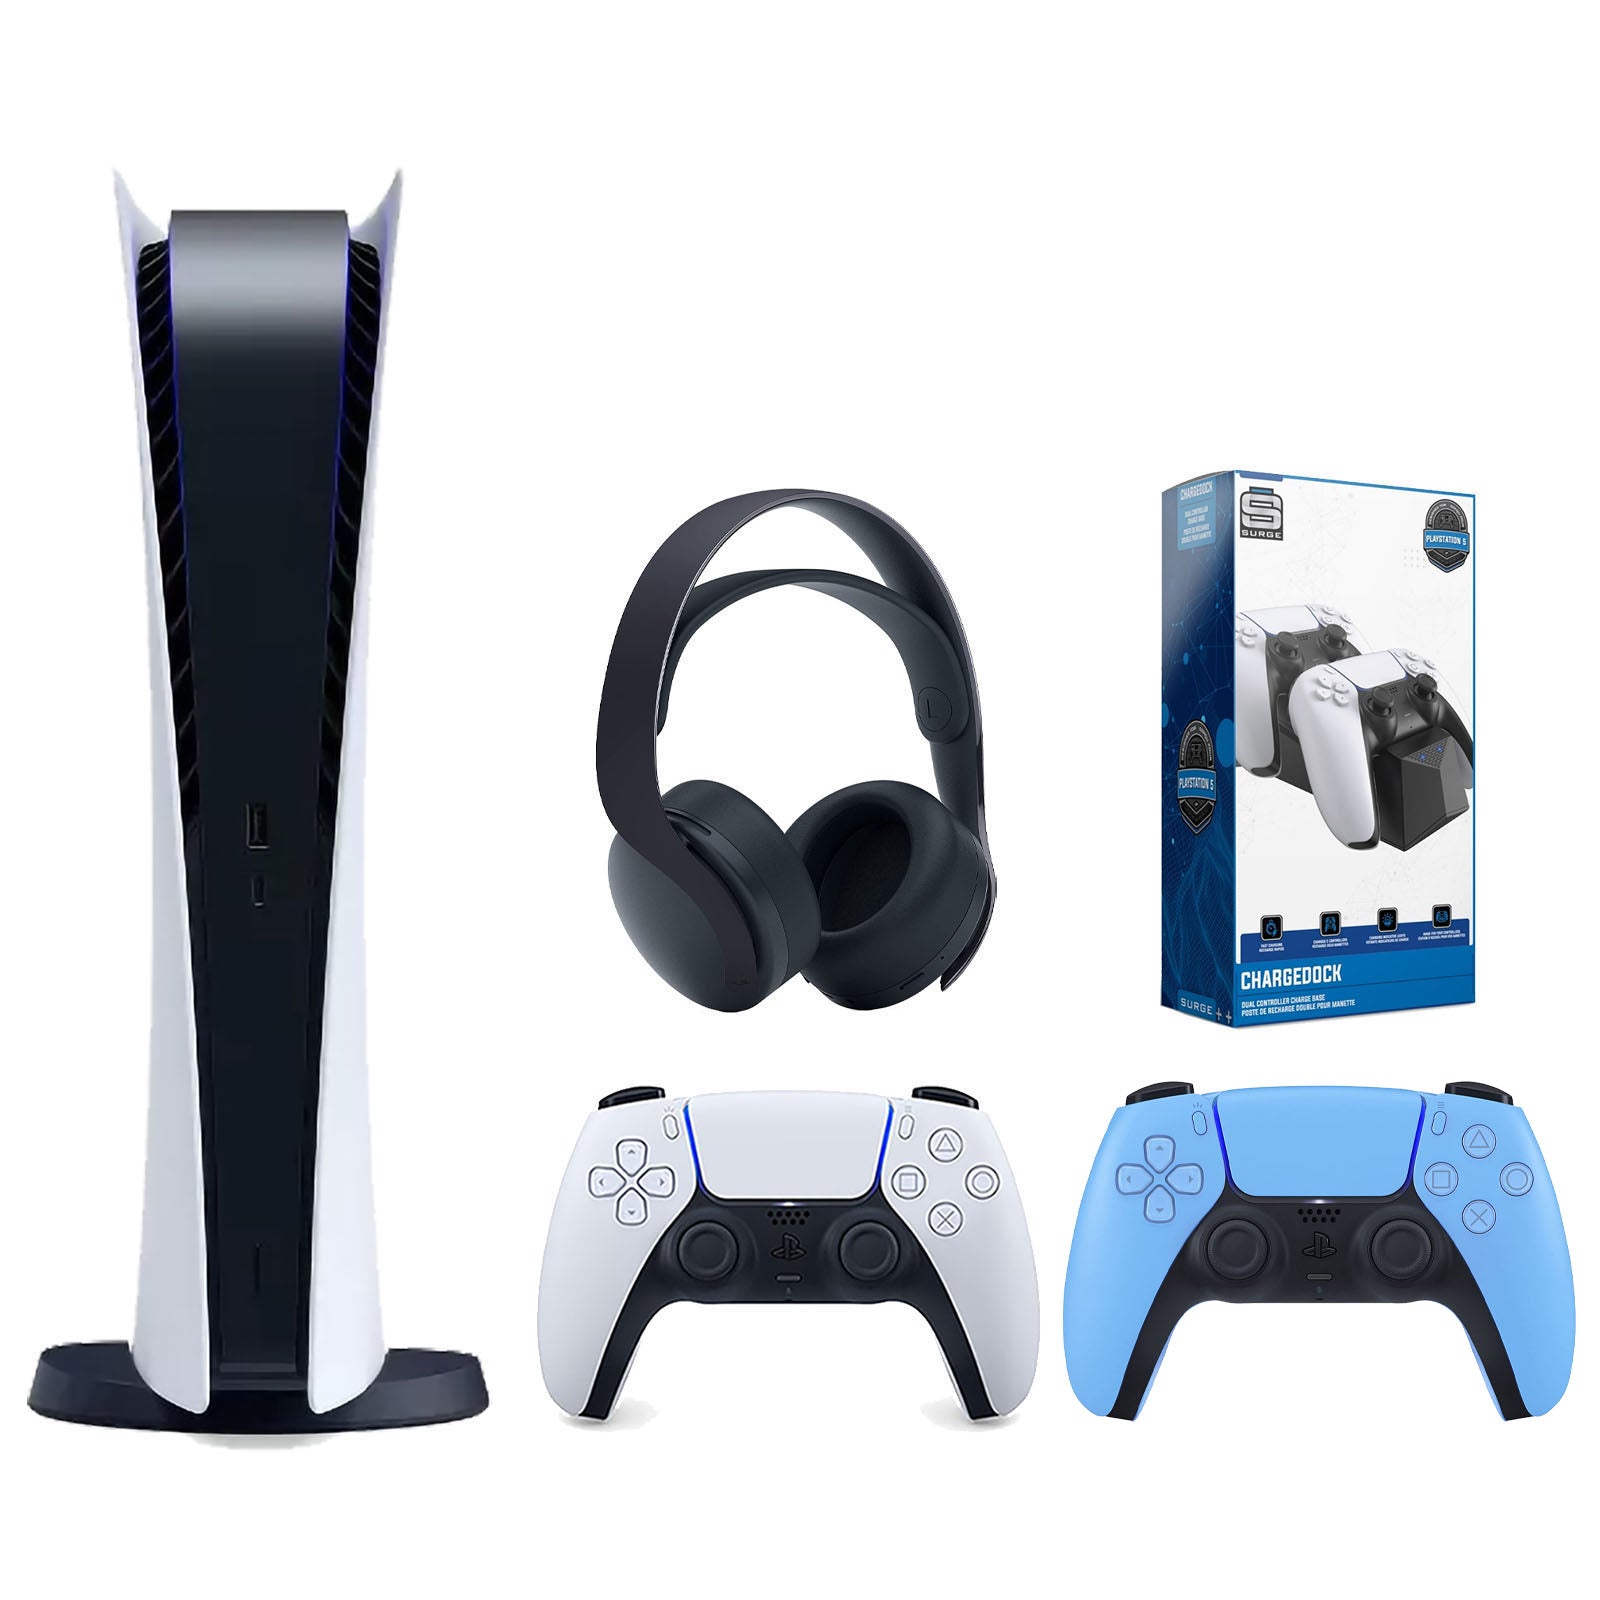 Sony Playstation 5 Digital Edition Console with Extra Blue Controller, Black PULSE 3D Headset and Surge Dual Controller Charge Dock Bundle - Pro-Distributing